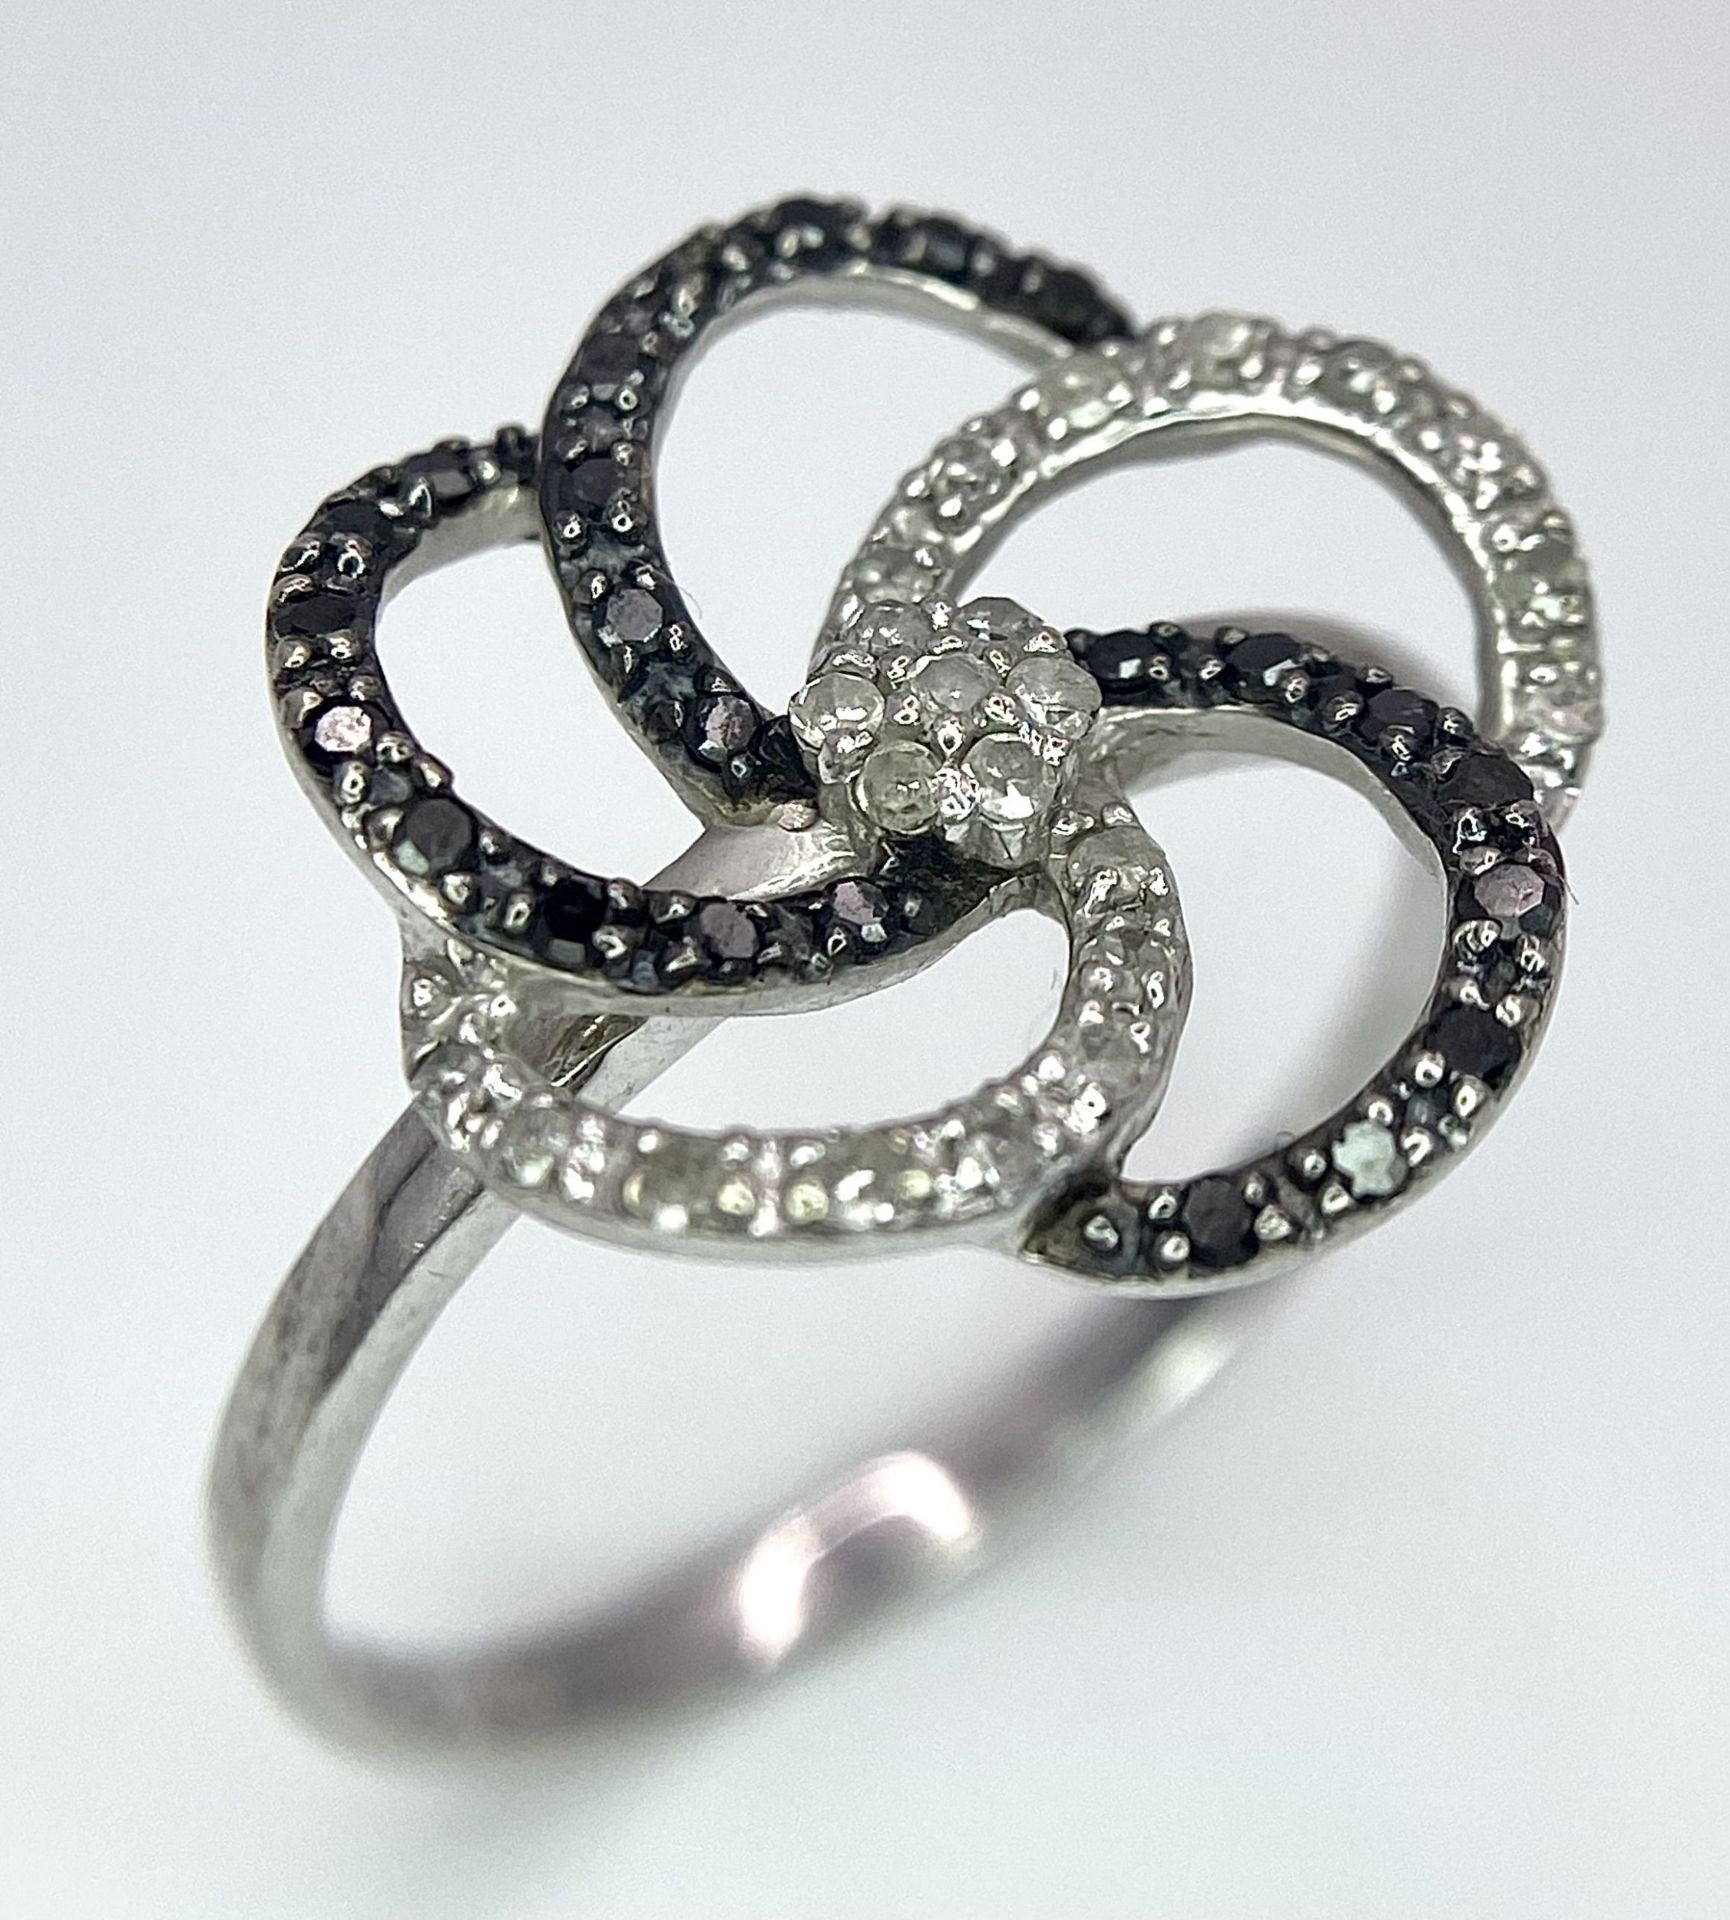 A 9K White Gold Black ad White Diamond Decorative Floral Ring. Size N. 2g total weight.